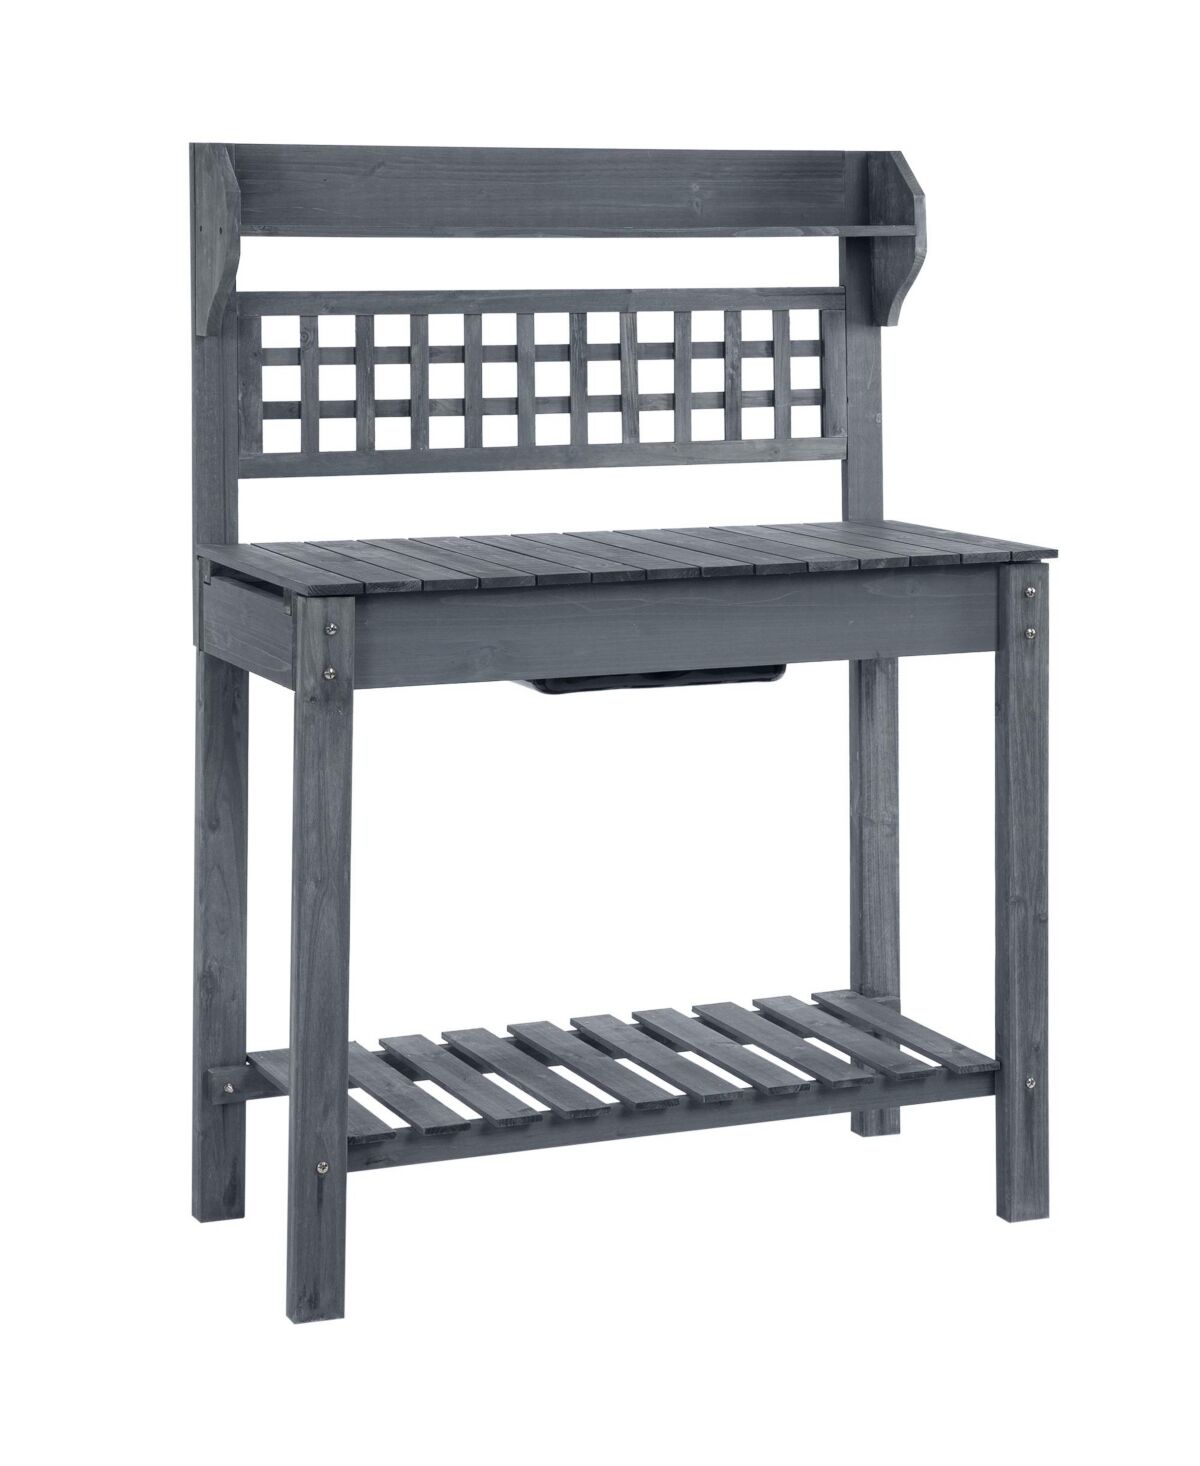 Outsunny Wooden Outdoor Potting Bench with Sink Basin & Clapboard, Natural - Grey